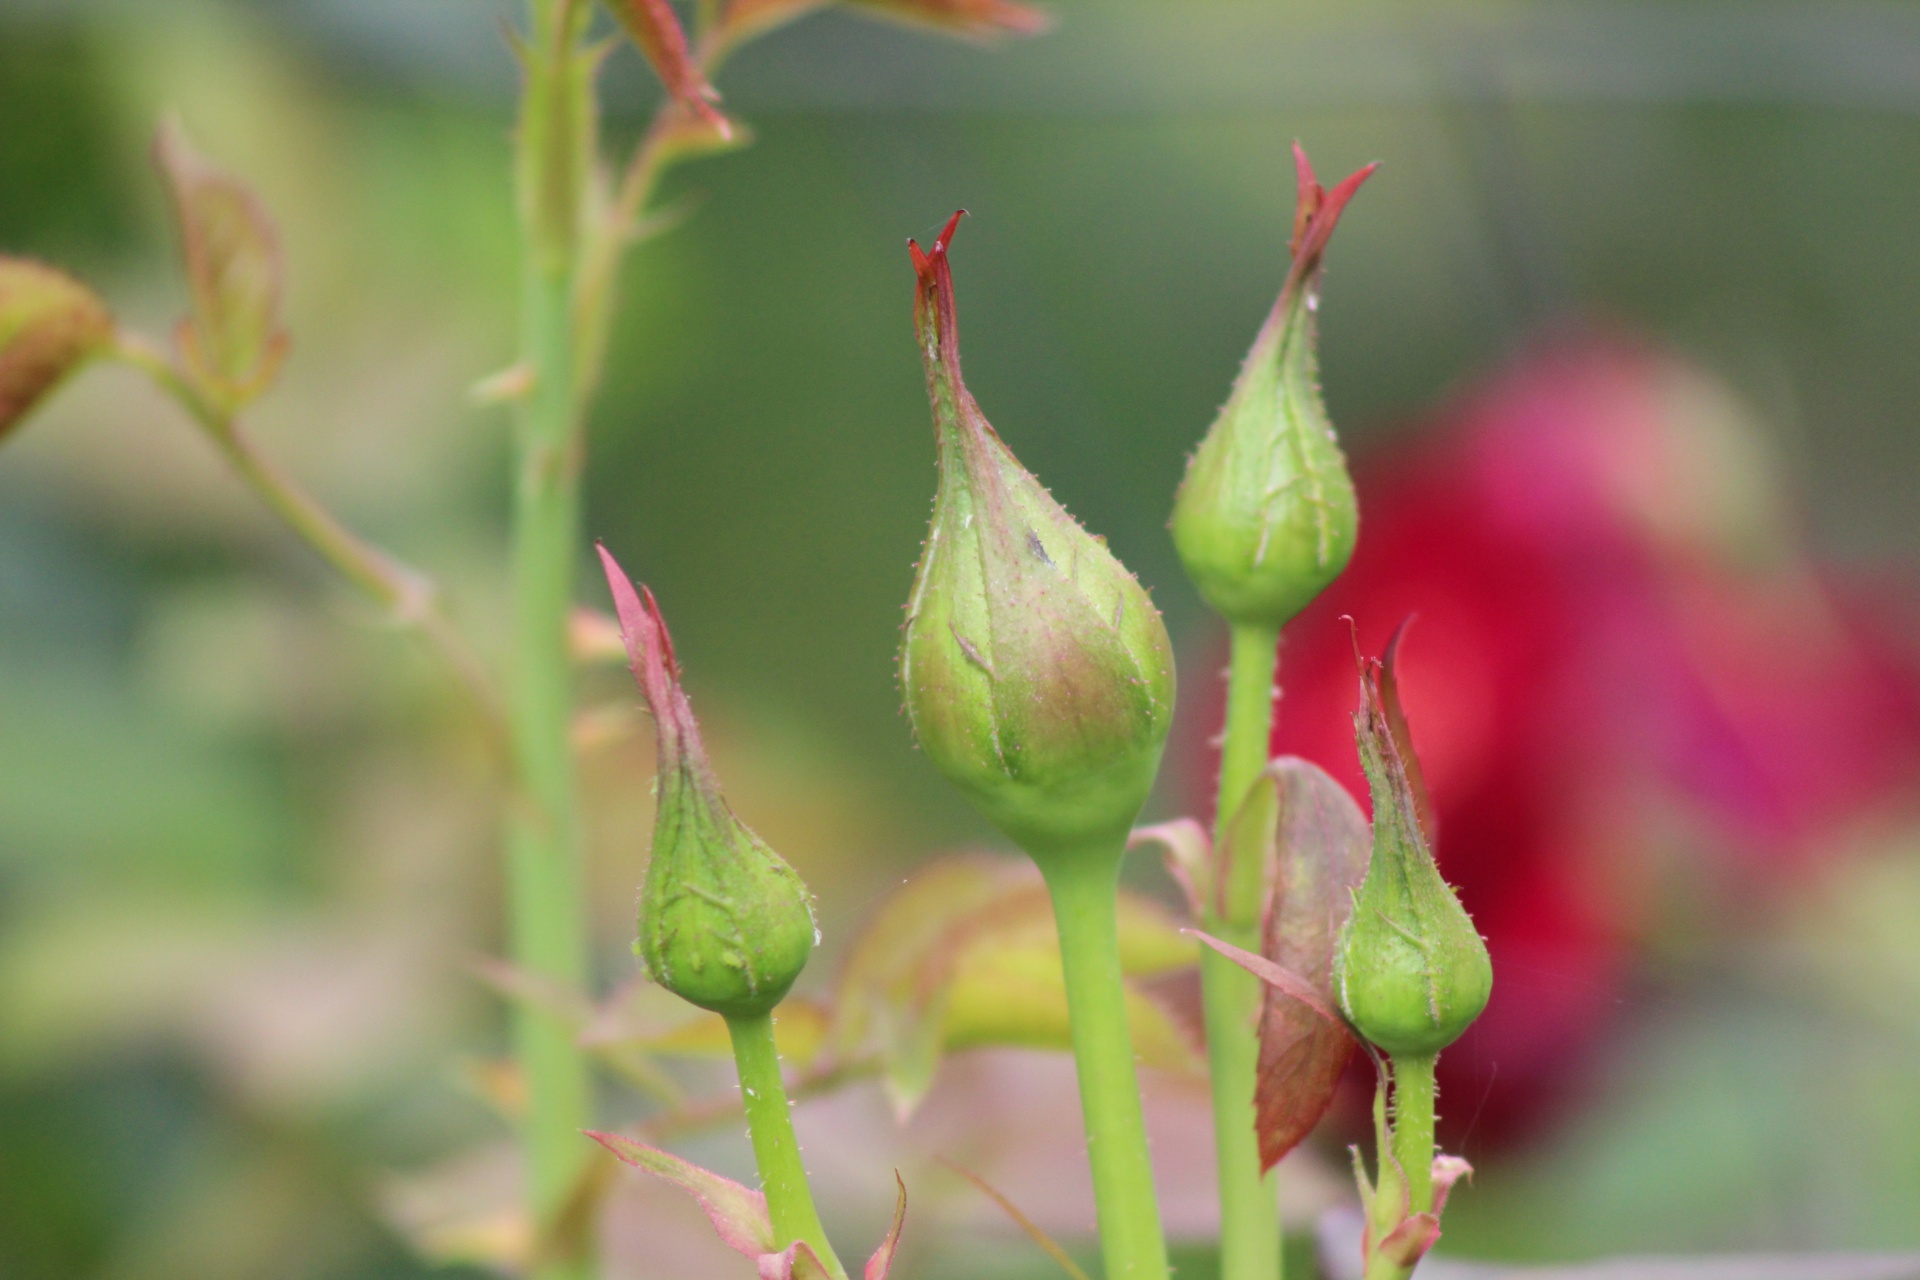 Seeing the buds is an exciting time for the gardener, because you are anticipating the beauty that comes later on